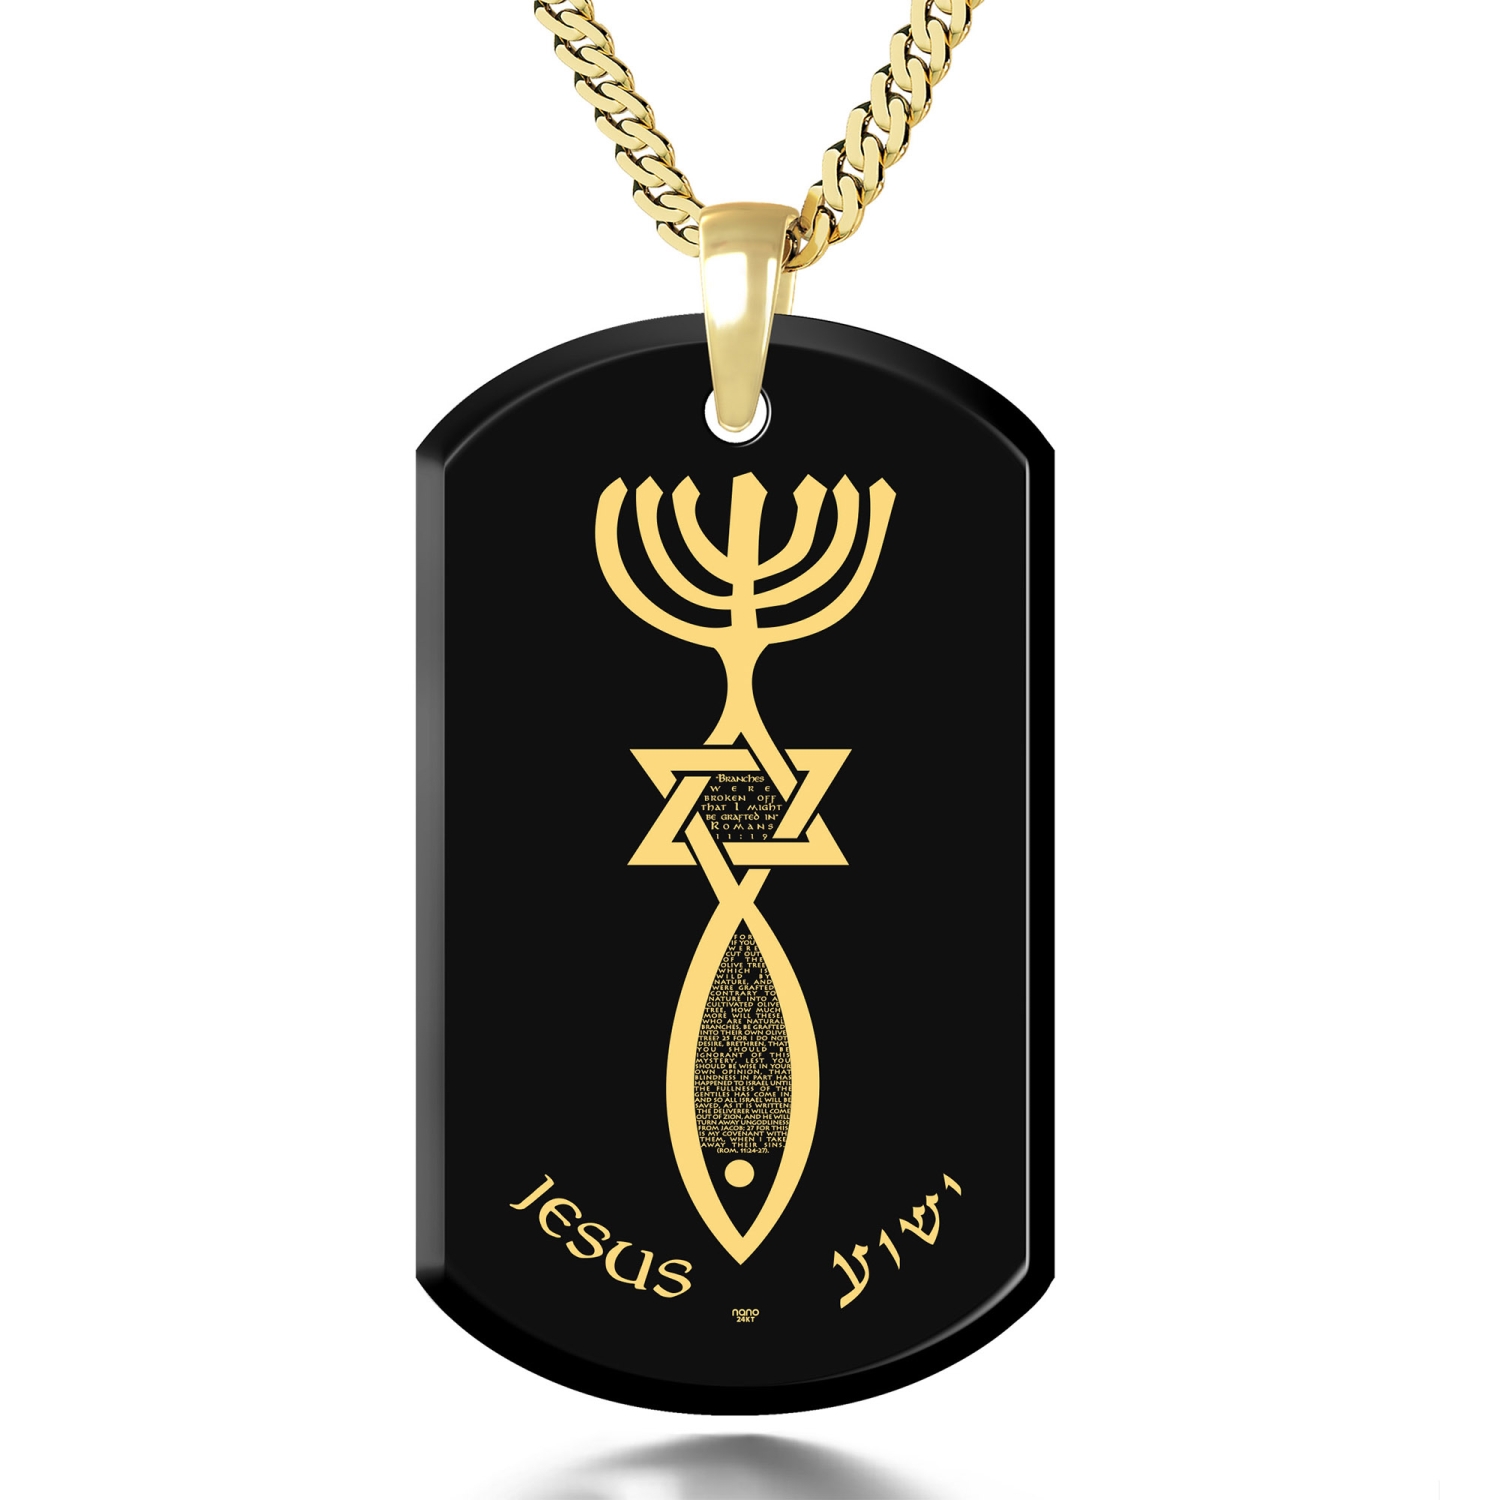 Nano 24K Gold Plated and Onyx ‘Squoval’ Shaped Grafted-In Necklace with 24K Gold Micro-Inscription - 3